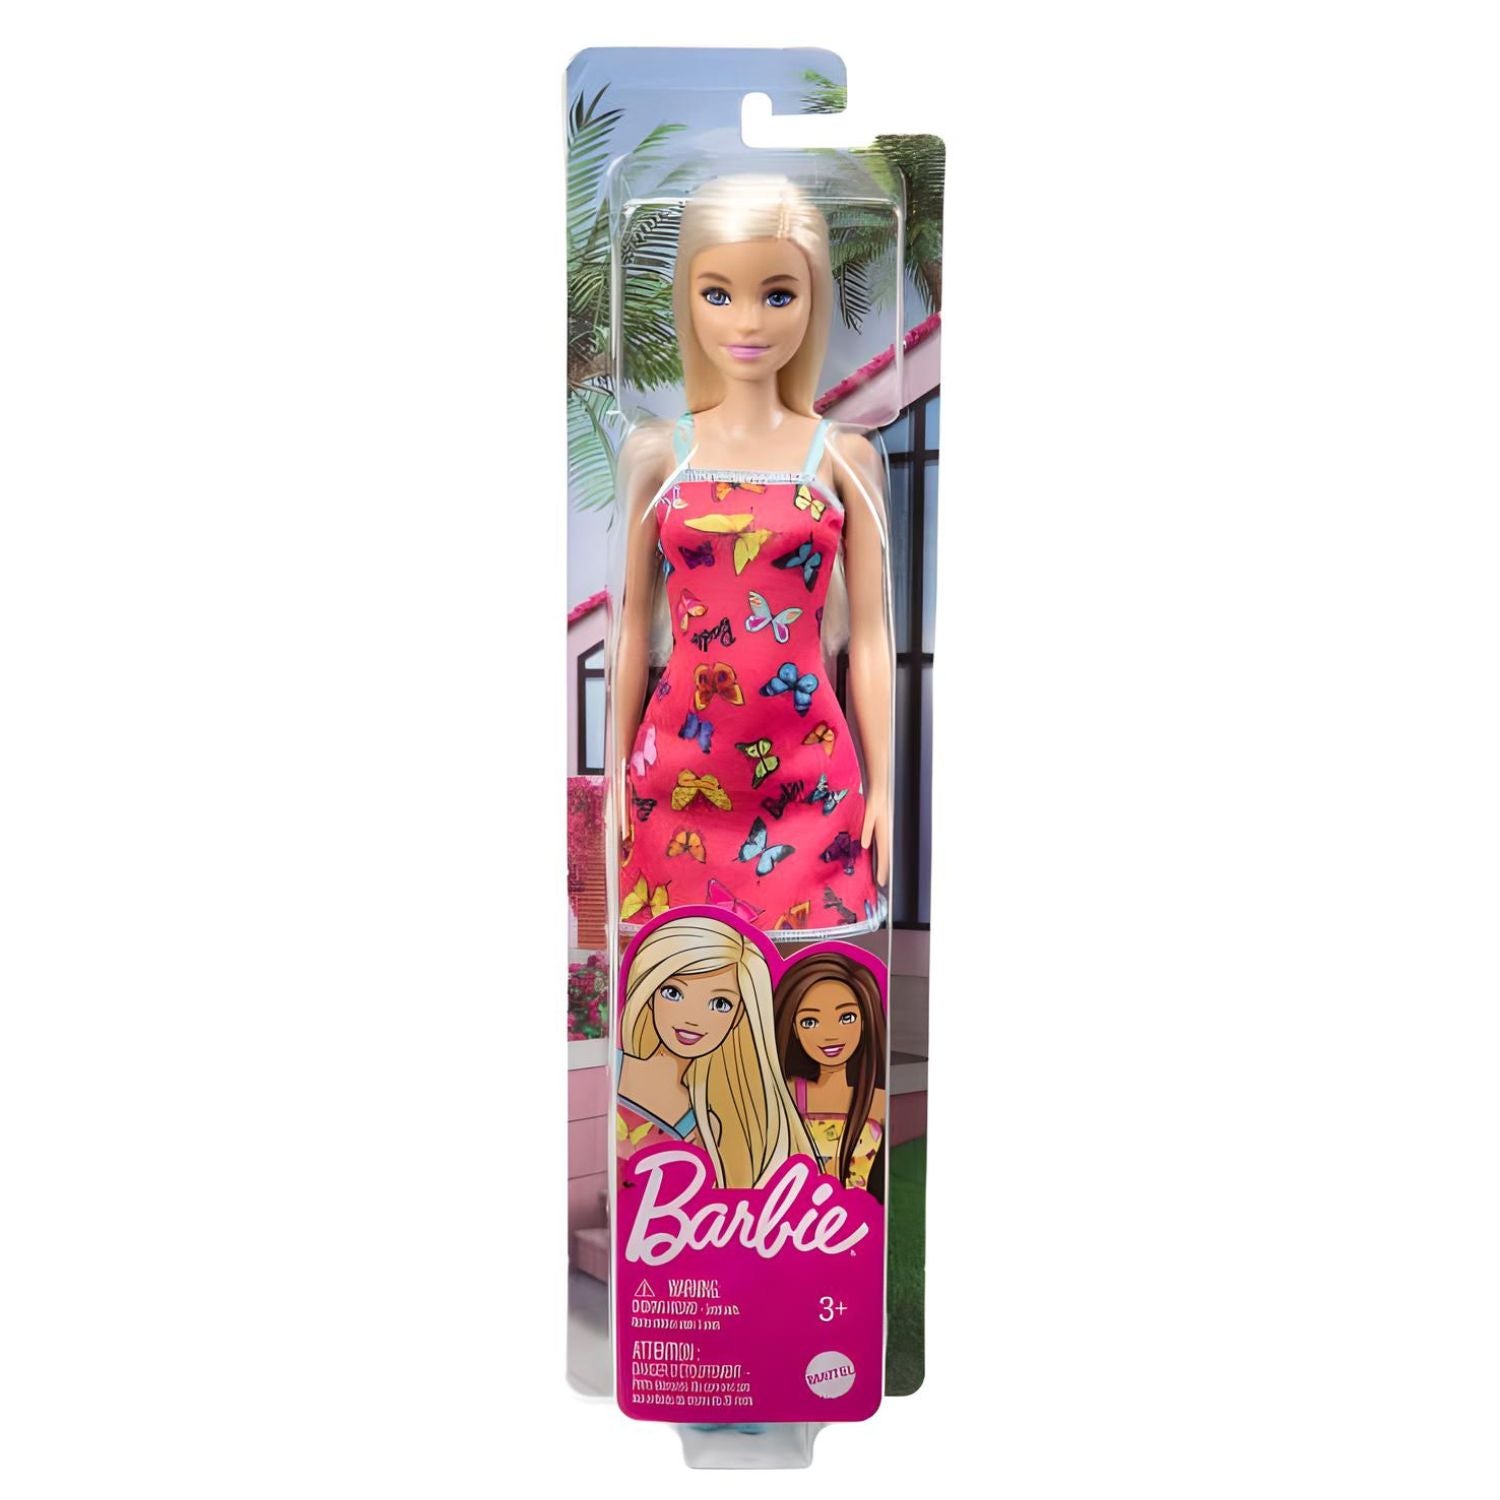 Barbie Doll Orignal HBV05 11.5 Inch Size Dress ,Blonde Hair Dressed - Color May Vary Best Gift For Girls